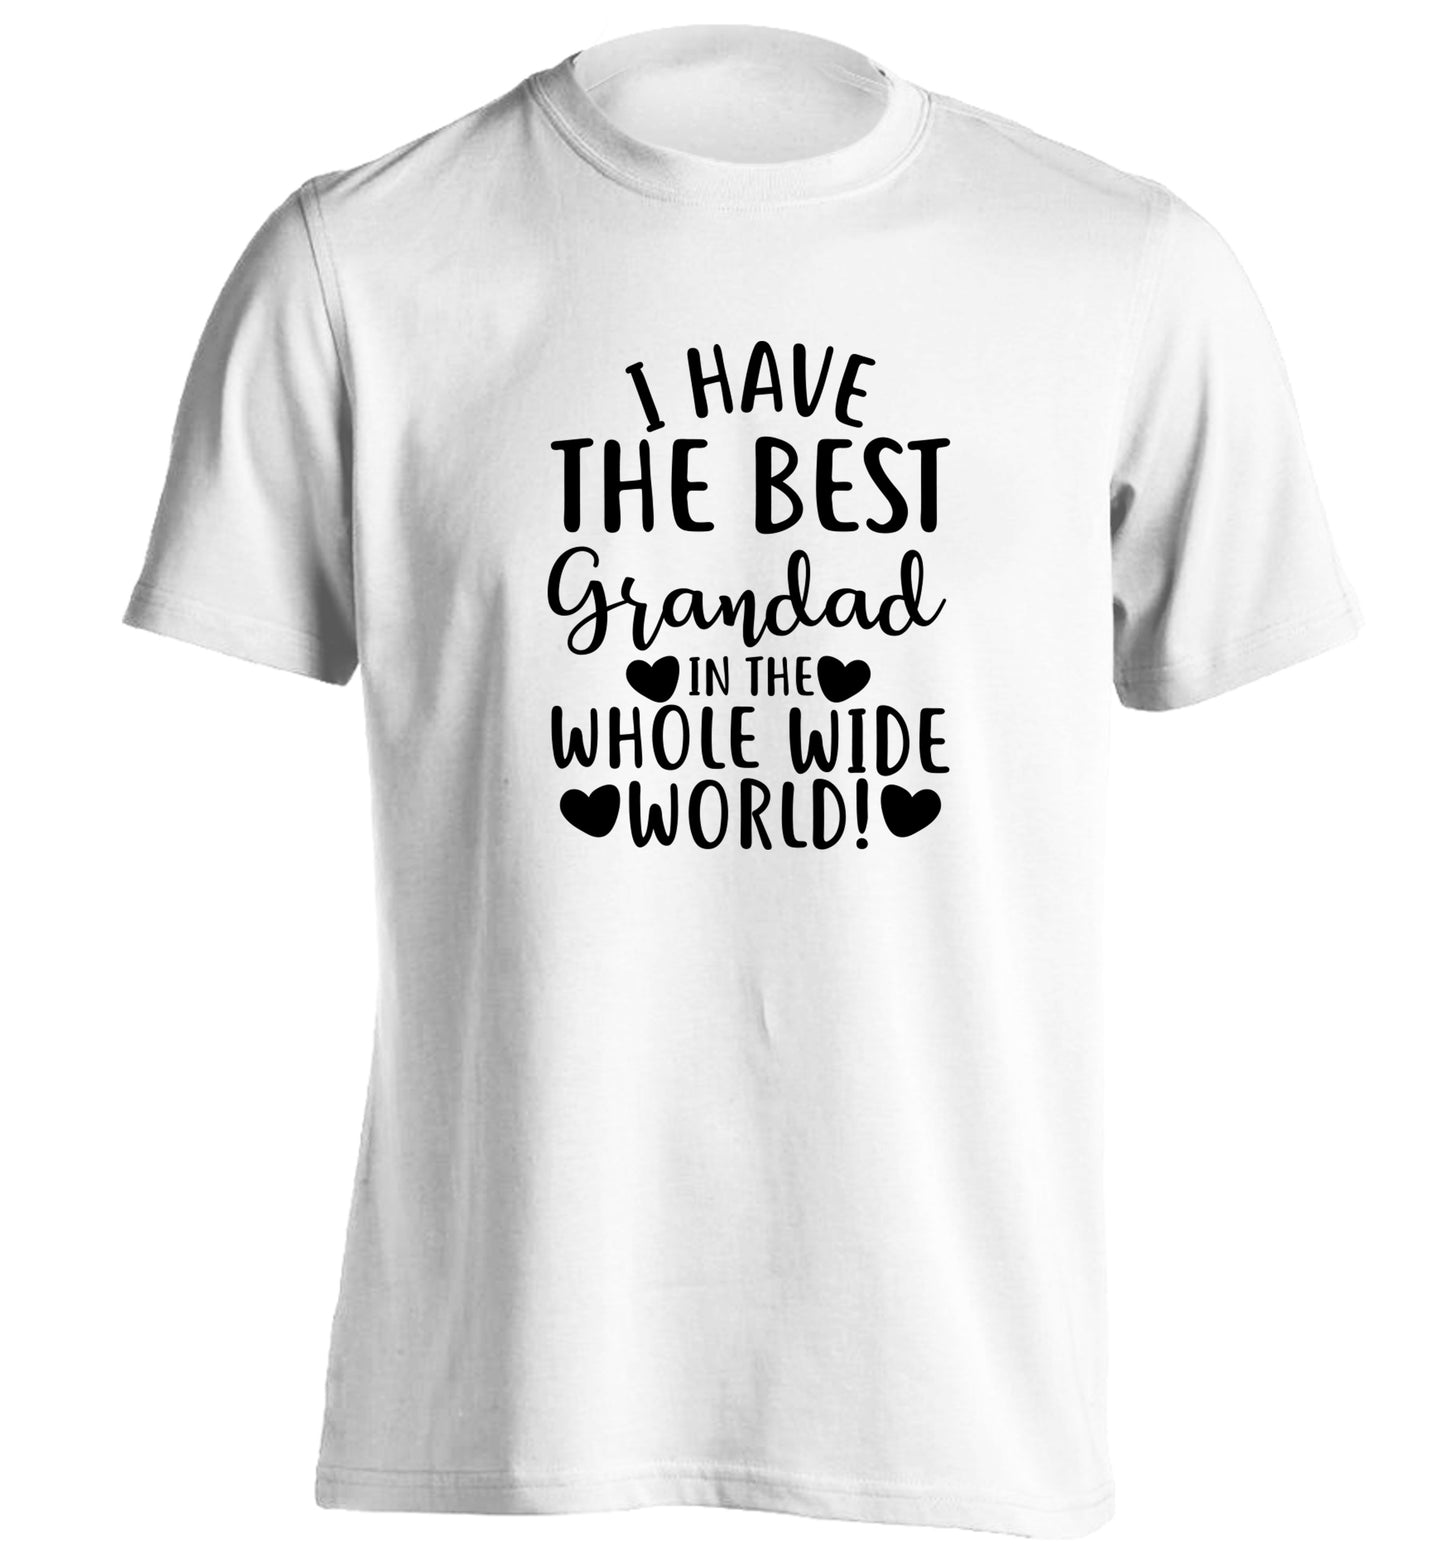 I have the best grandad in the whole wide world! adults unisex white Tshirt 2XL